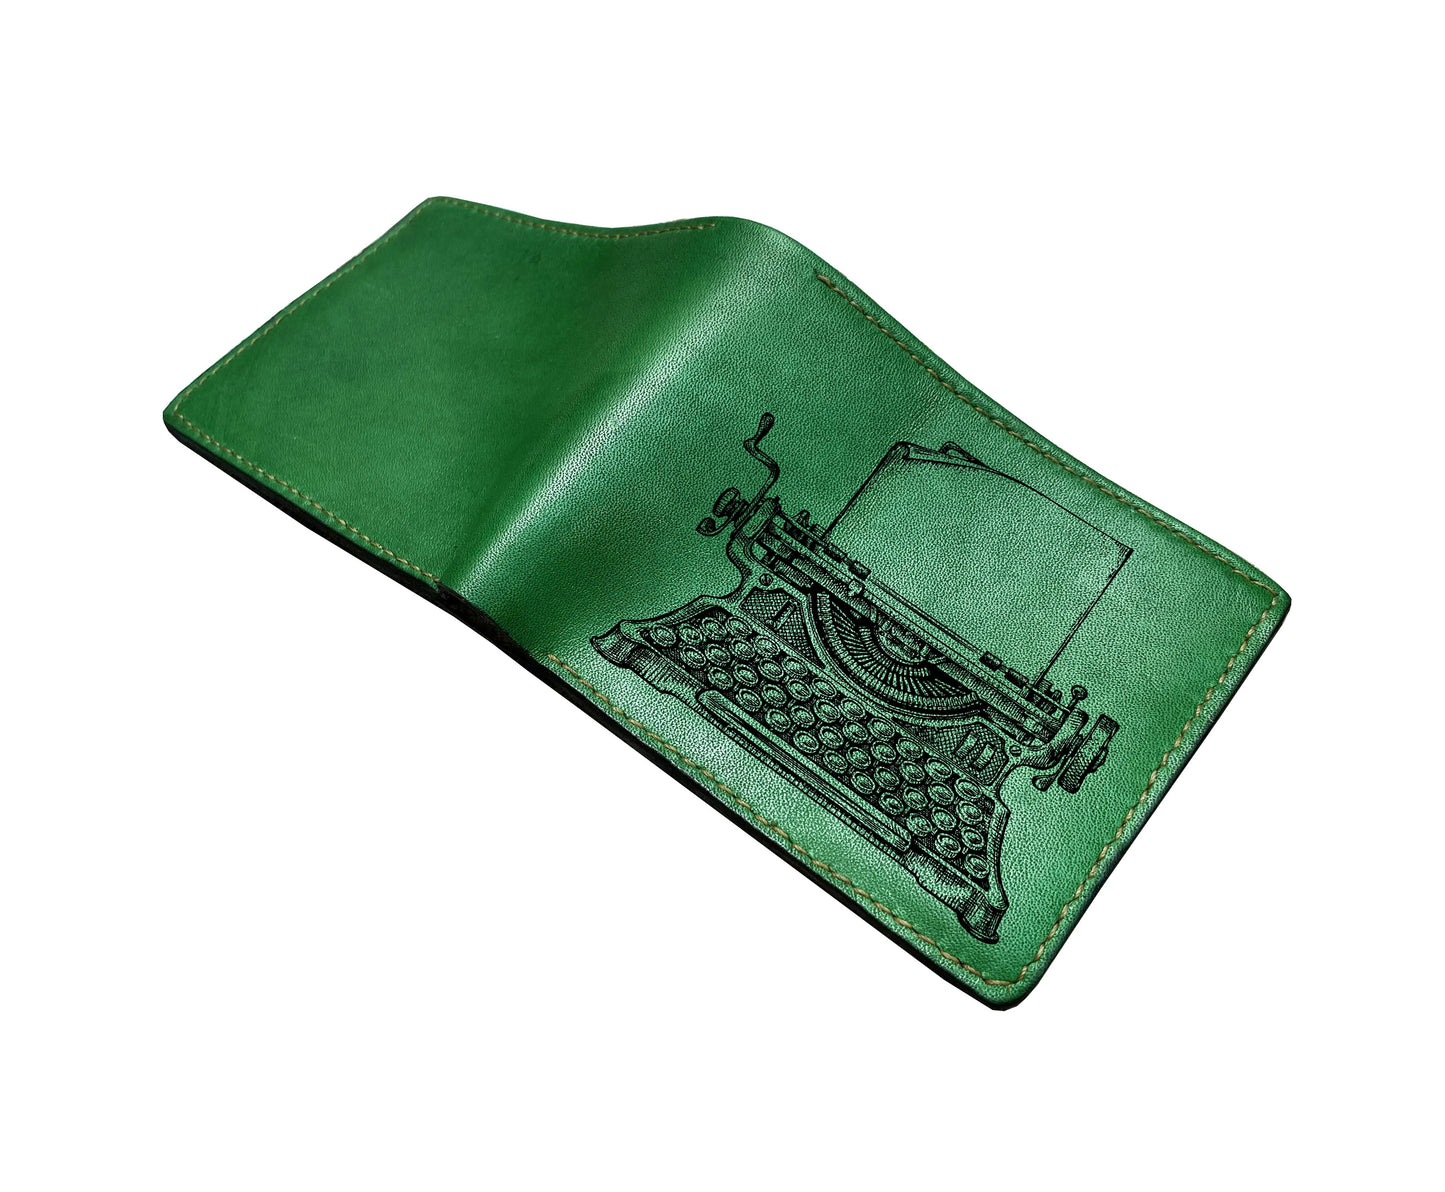 Mayan Corner - Vintage object retro style wallet, gramophone vinyl player drawing, old style pattern leather wallet, retro style wallet for dad, husband